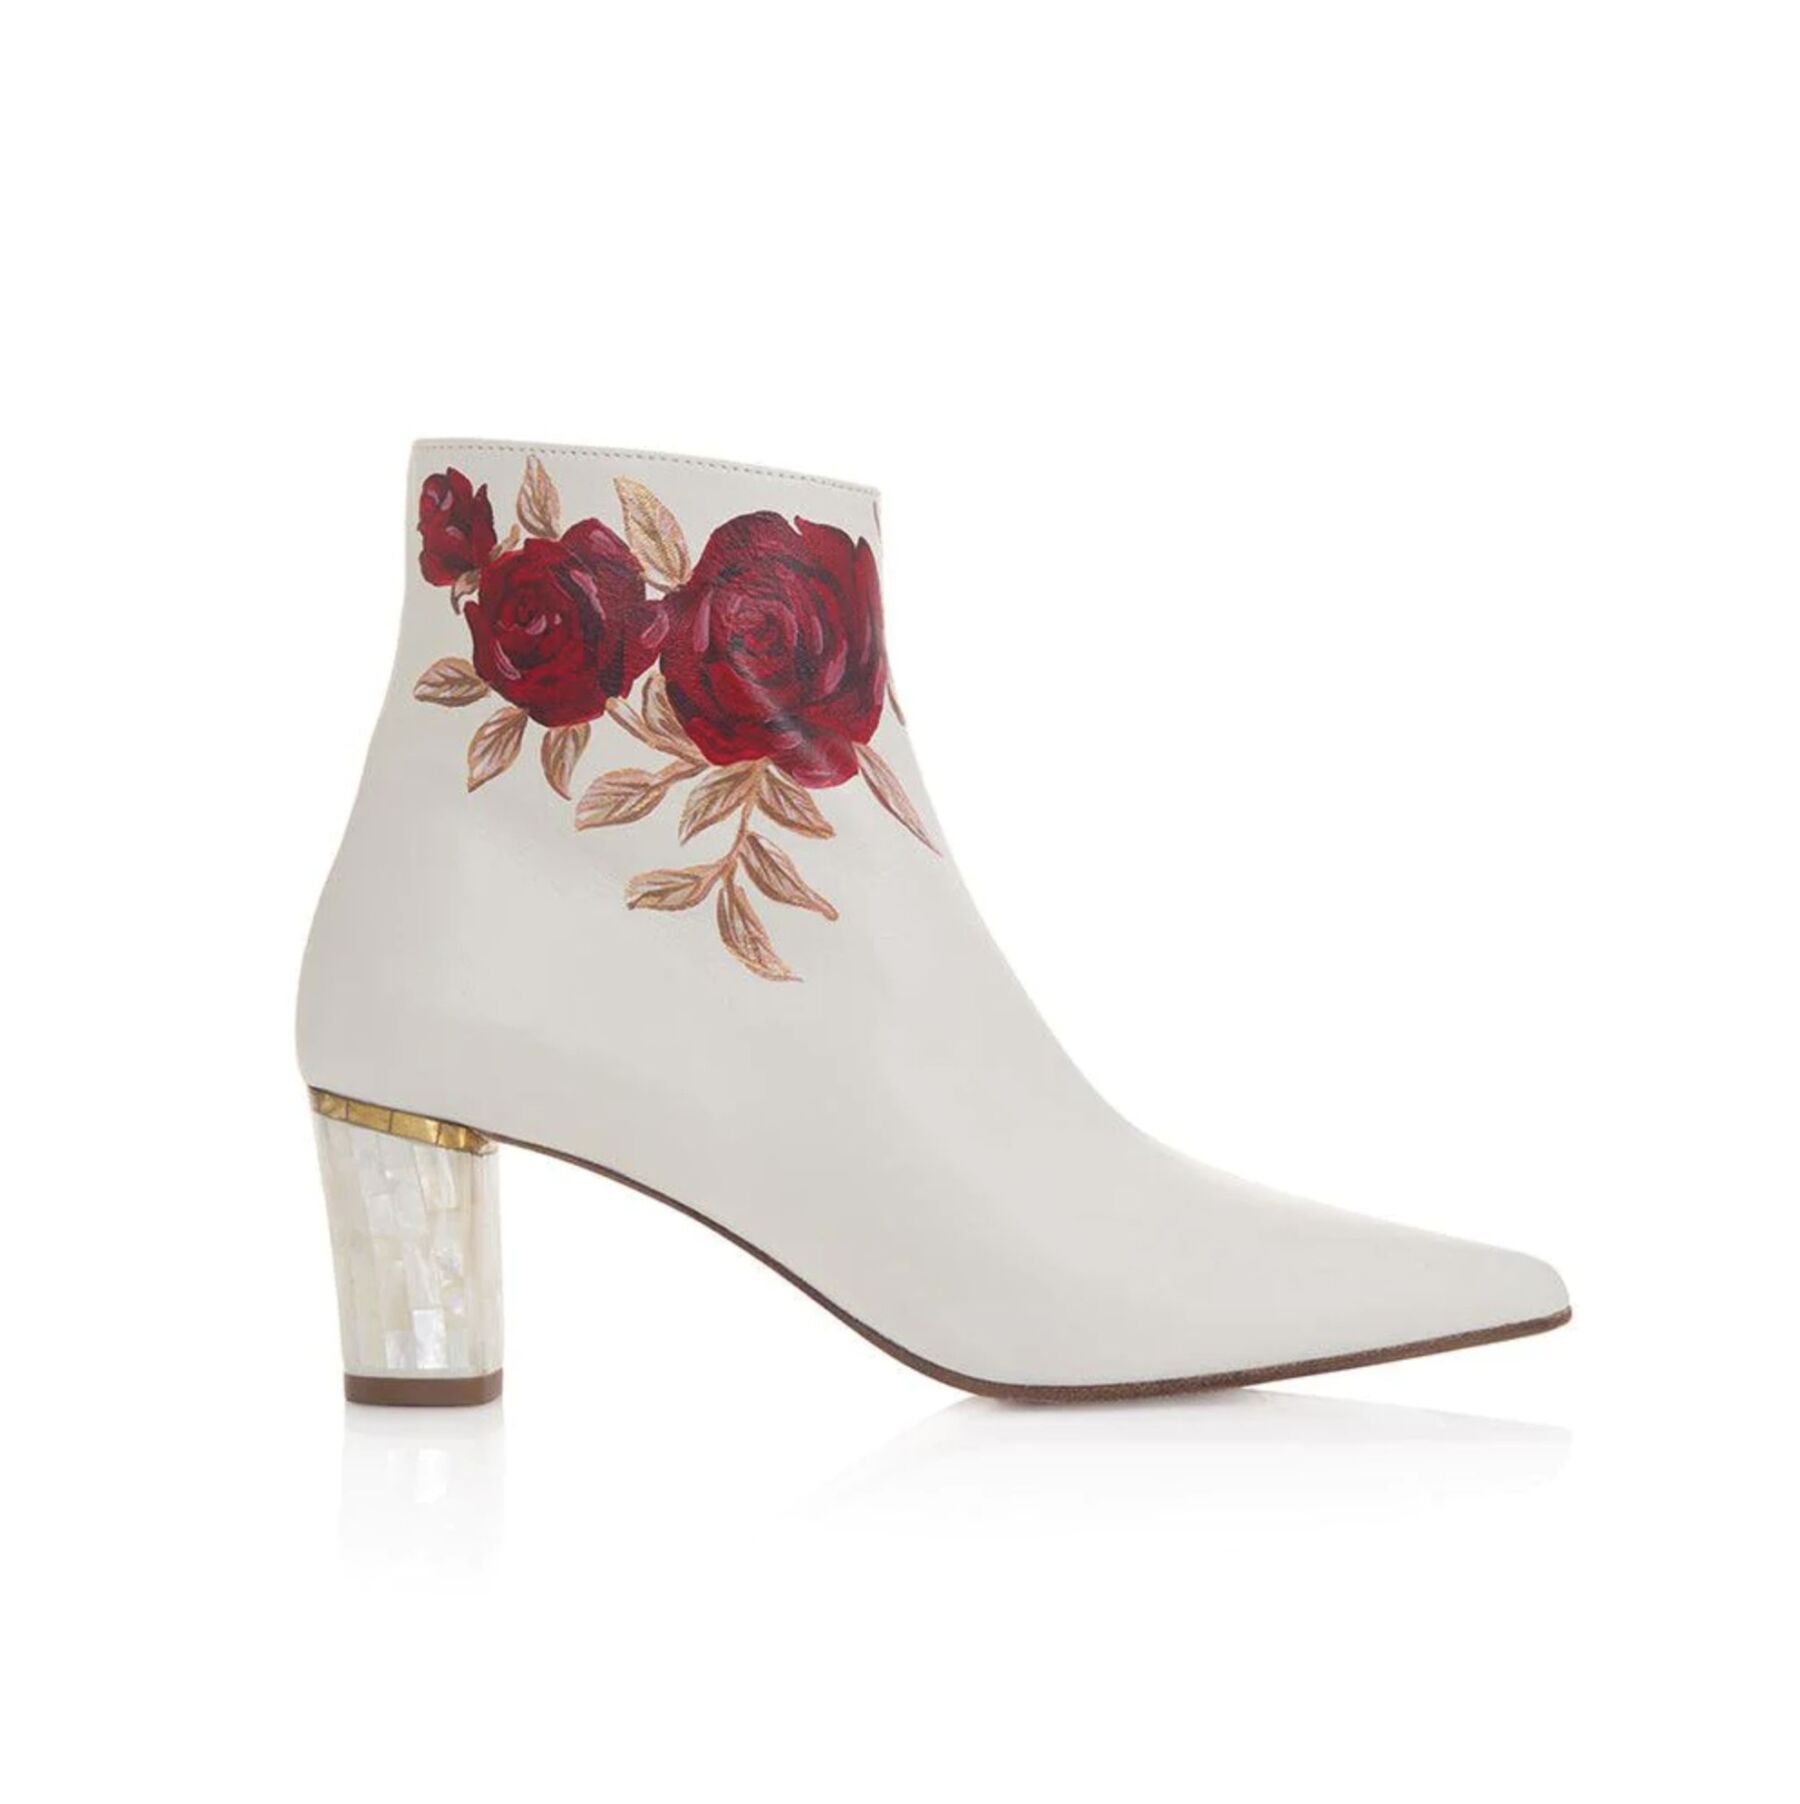 Freya Rose Bertie Valentine Hand Painted Rose Bridal Boots With Mother of Pearl Block Heel